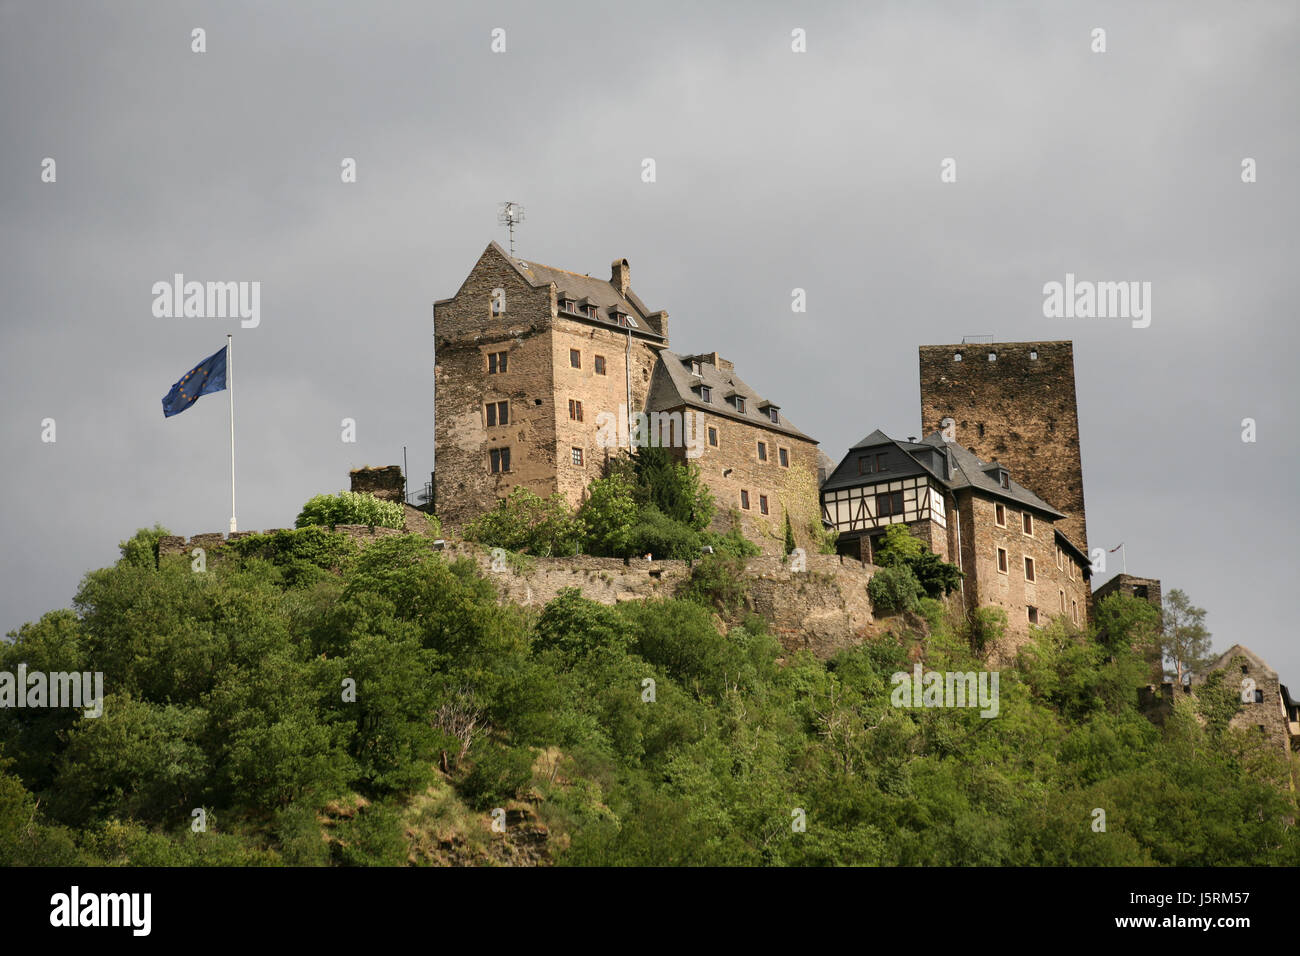 rhine romanticism germany german federal republic fortress style of ...